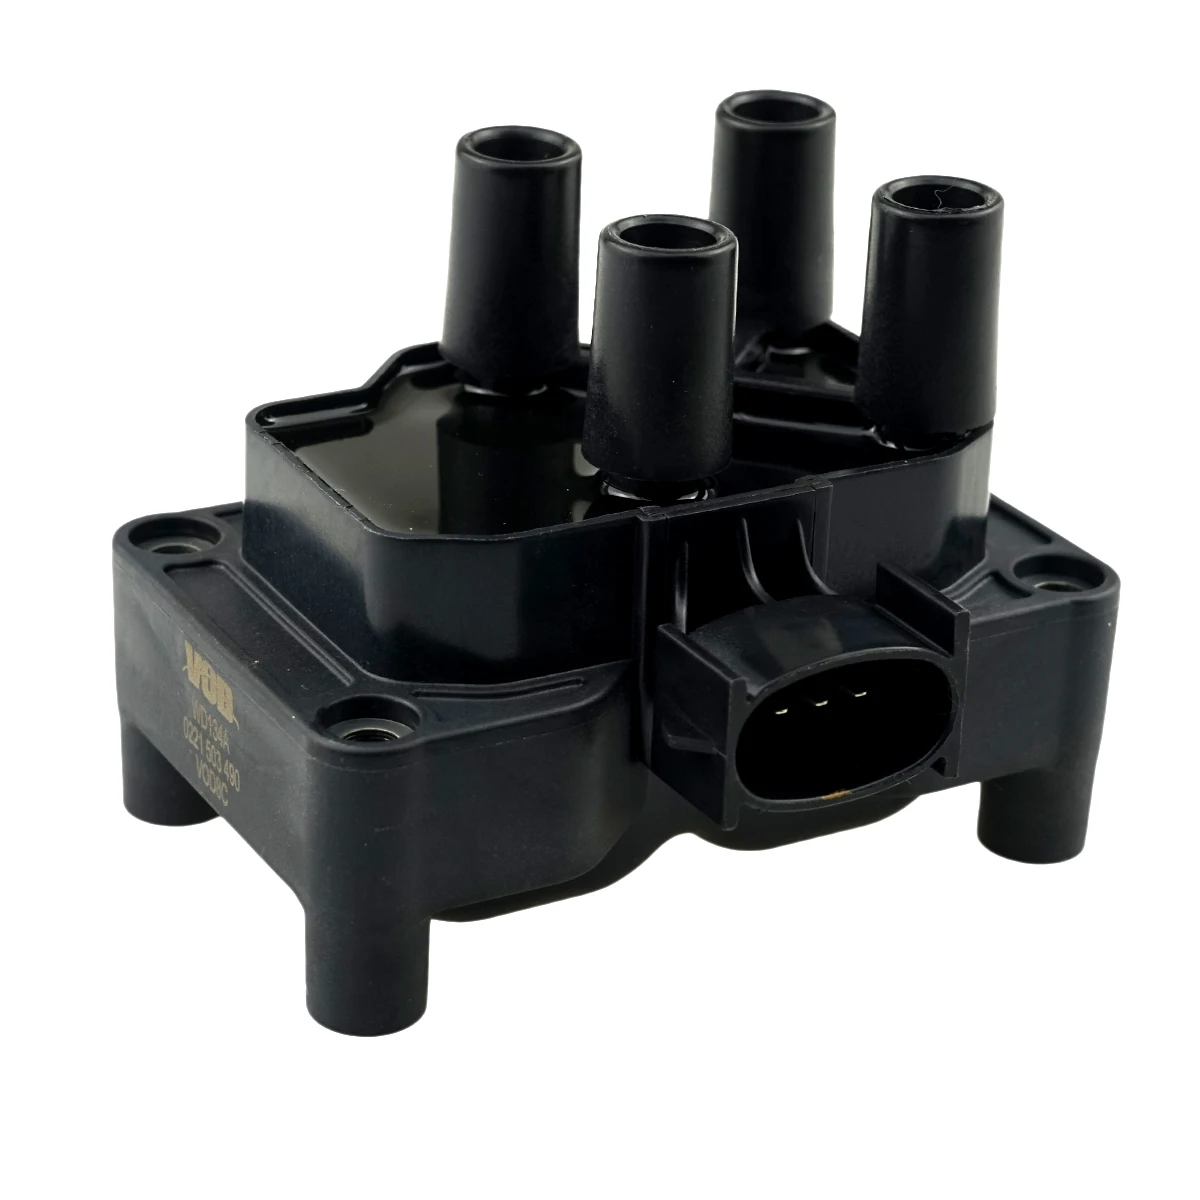 

Auto Ignition Coil for Ford Mondeo CD132 2.0L 2000 2001 2002 2003 2004 2005 2006 2007 0221503490 30735759